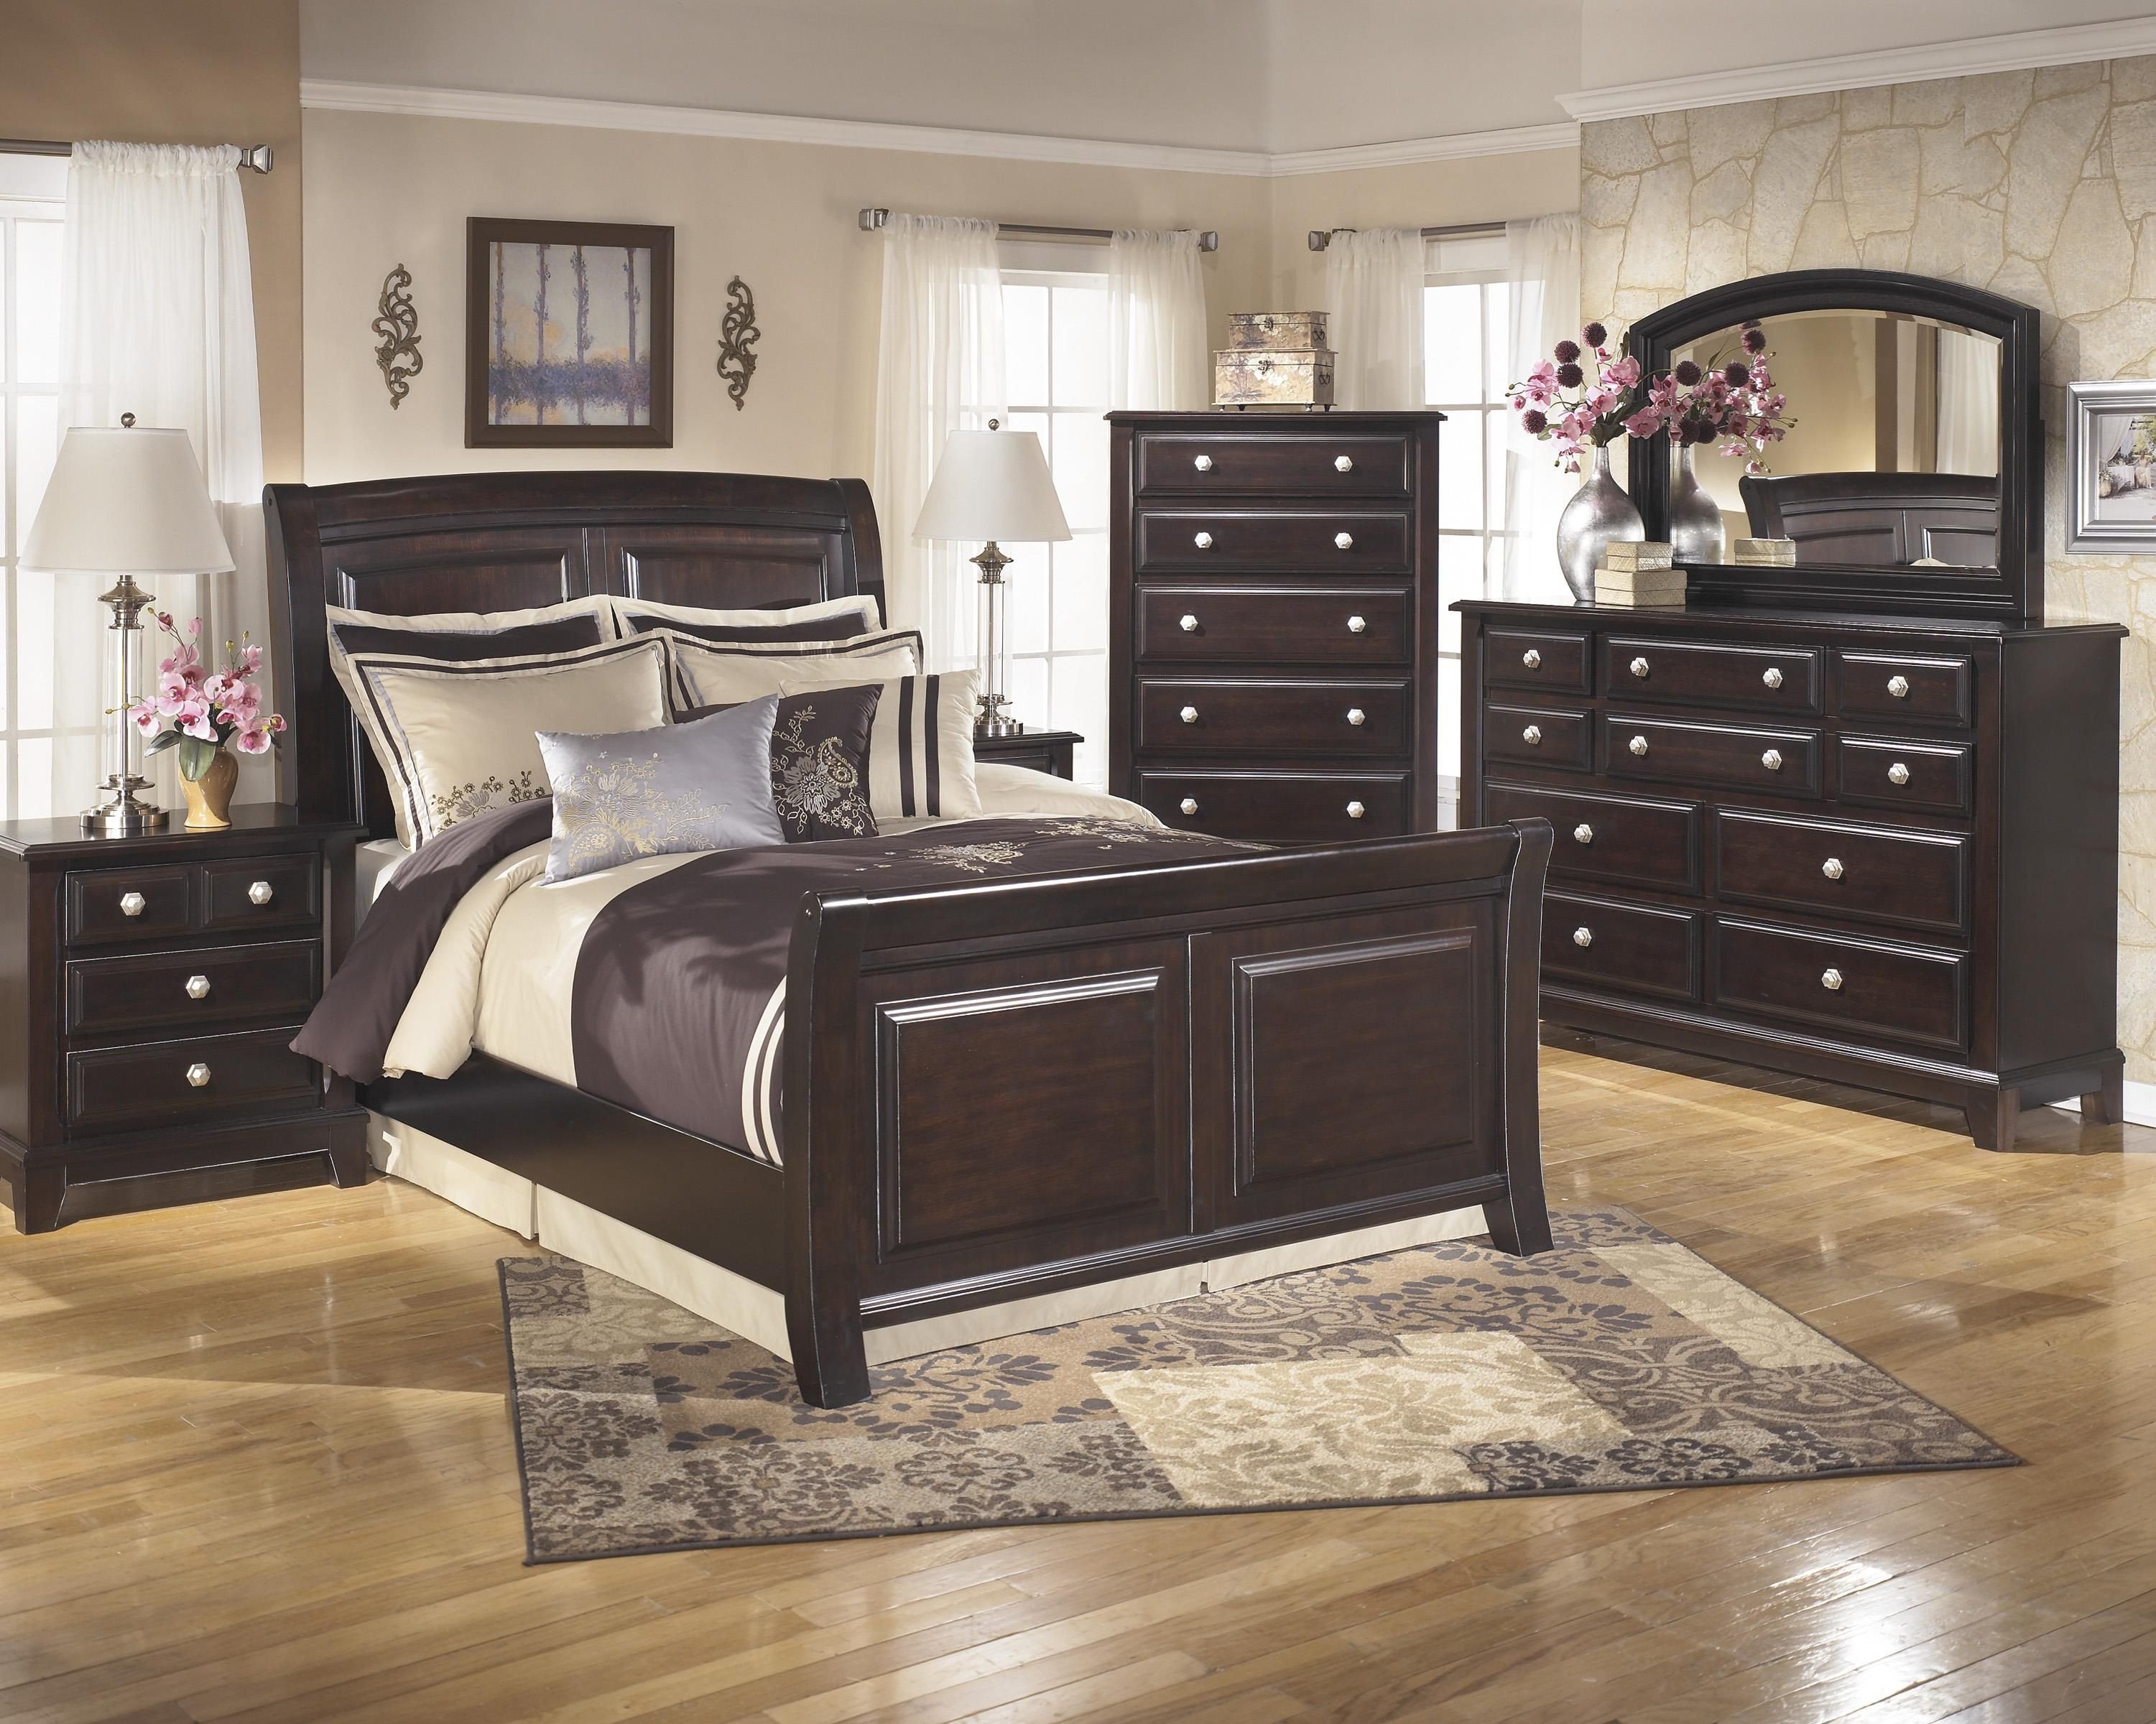 Ashley Furniture Queen Size Bedroom Set Unique Ridgley King Bedroom Group by Signature Design by ashley